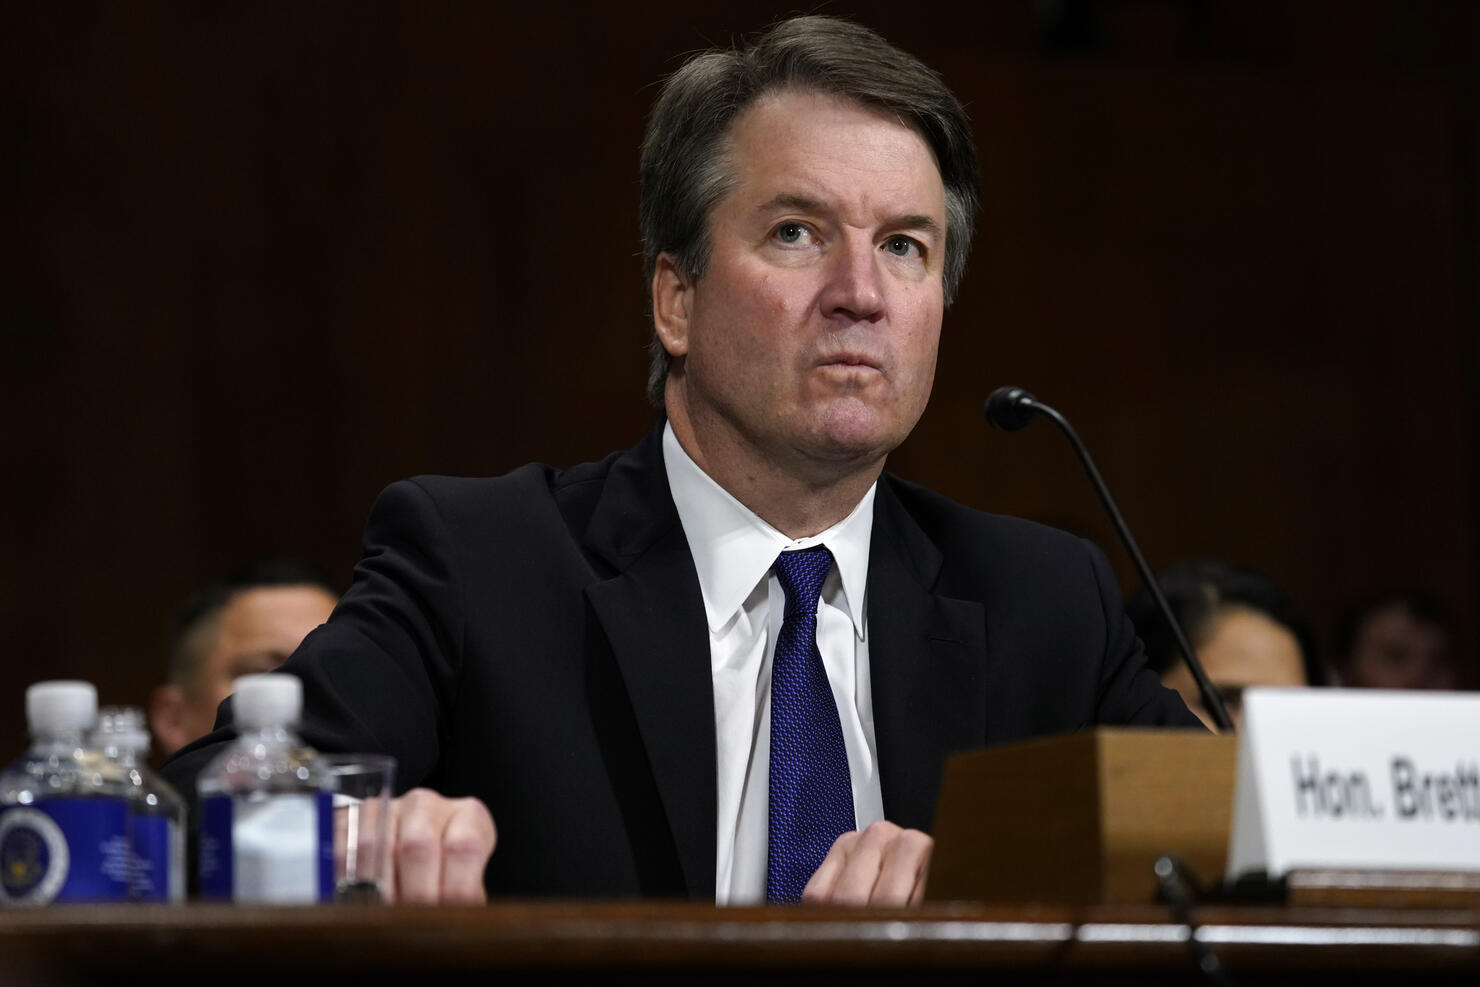 Brett Kavanaugh's confirmation to the Supreme Court one of the biggest stories of 2018